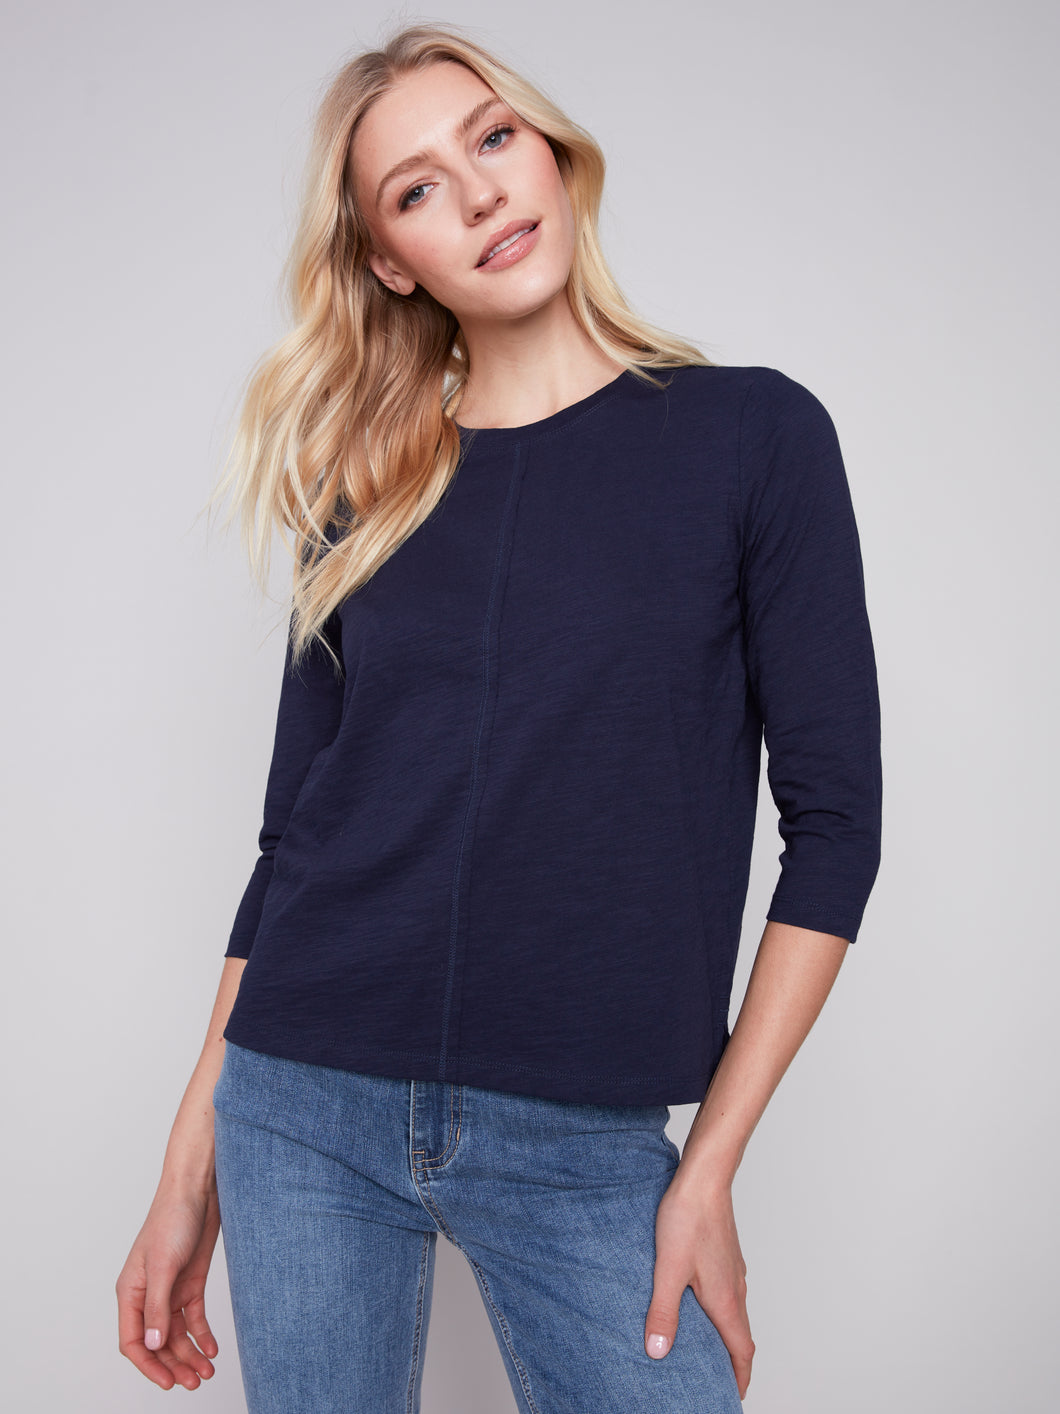 Charlie B 3/4 Sleeve Round Neck Organic Cotton Knit Top in Navy or Cherry